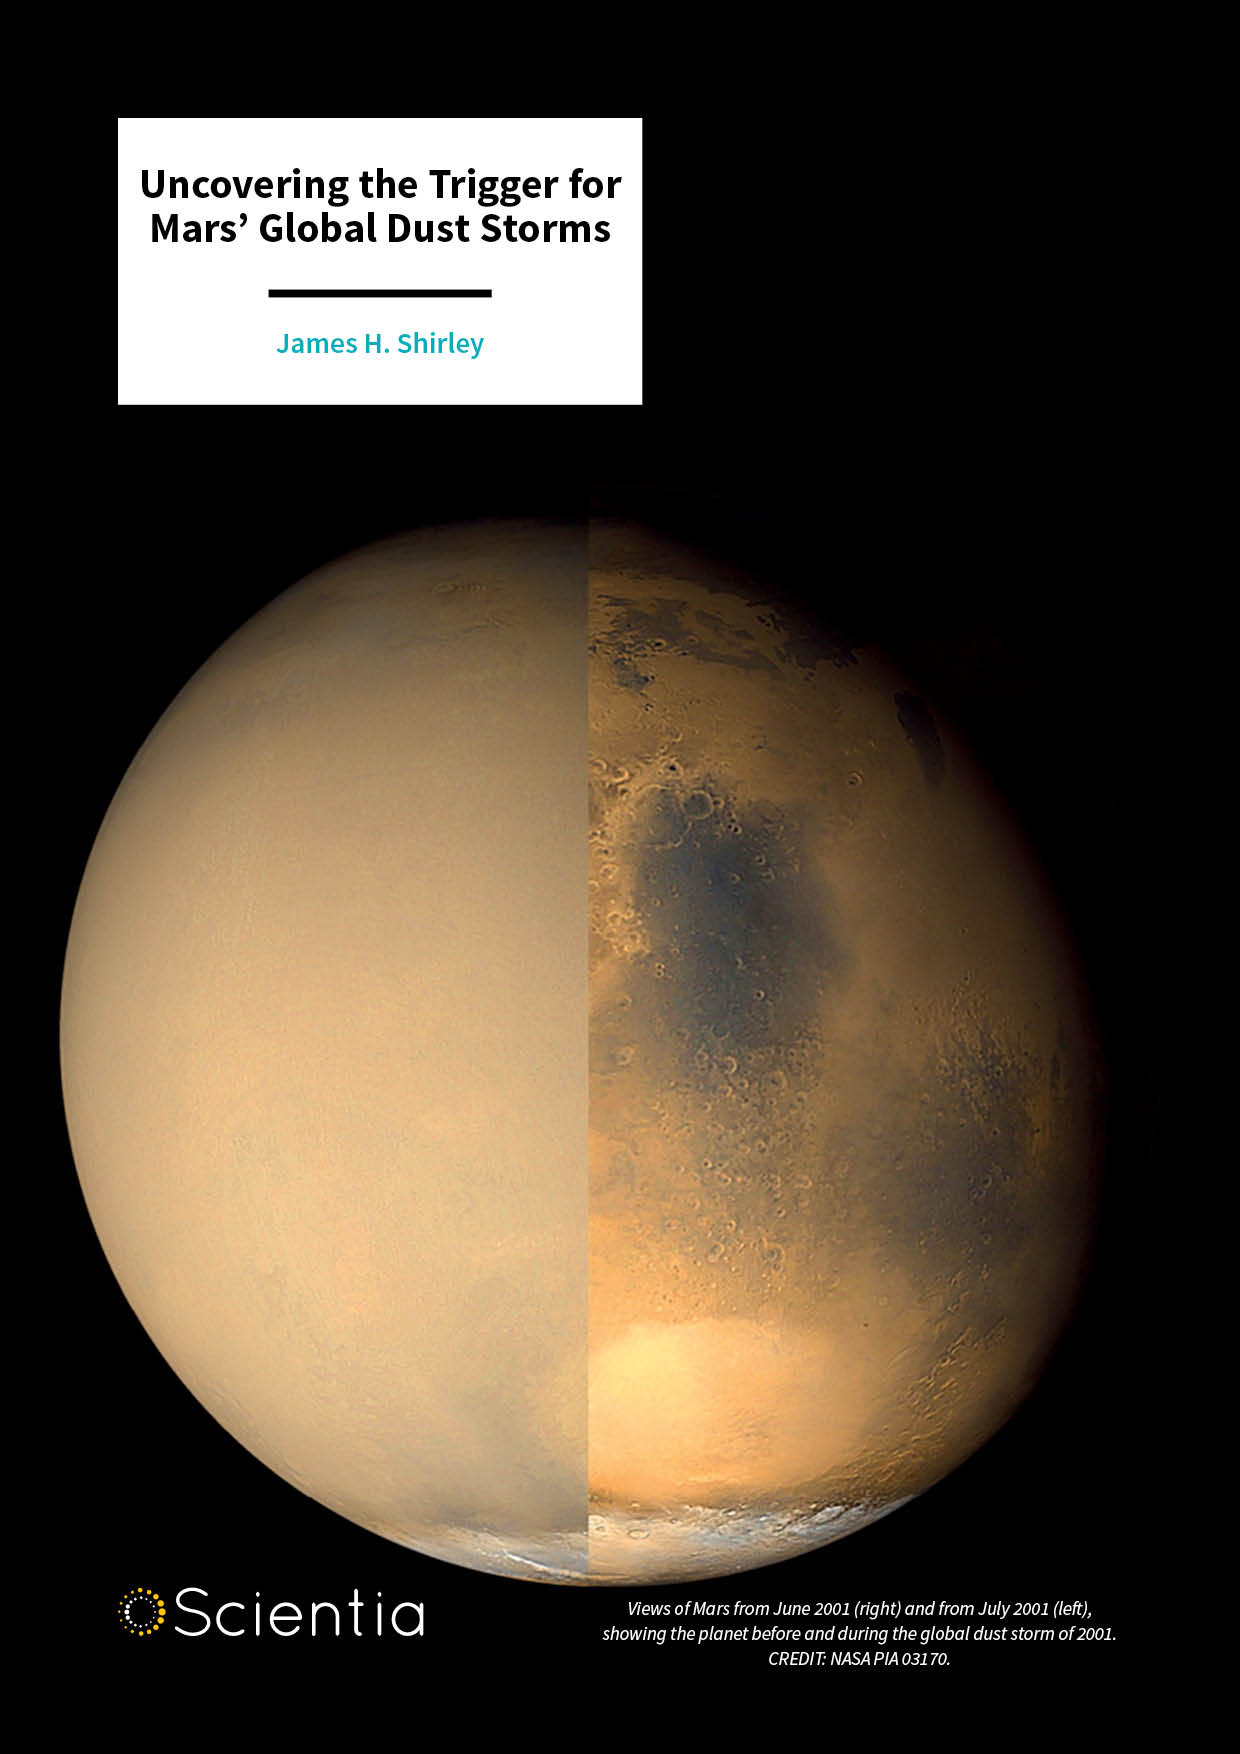 James H. Shirley – Uncovering the Trigger for Mars’ Global Dust Storms